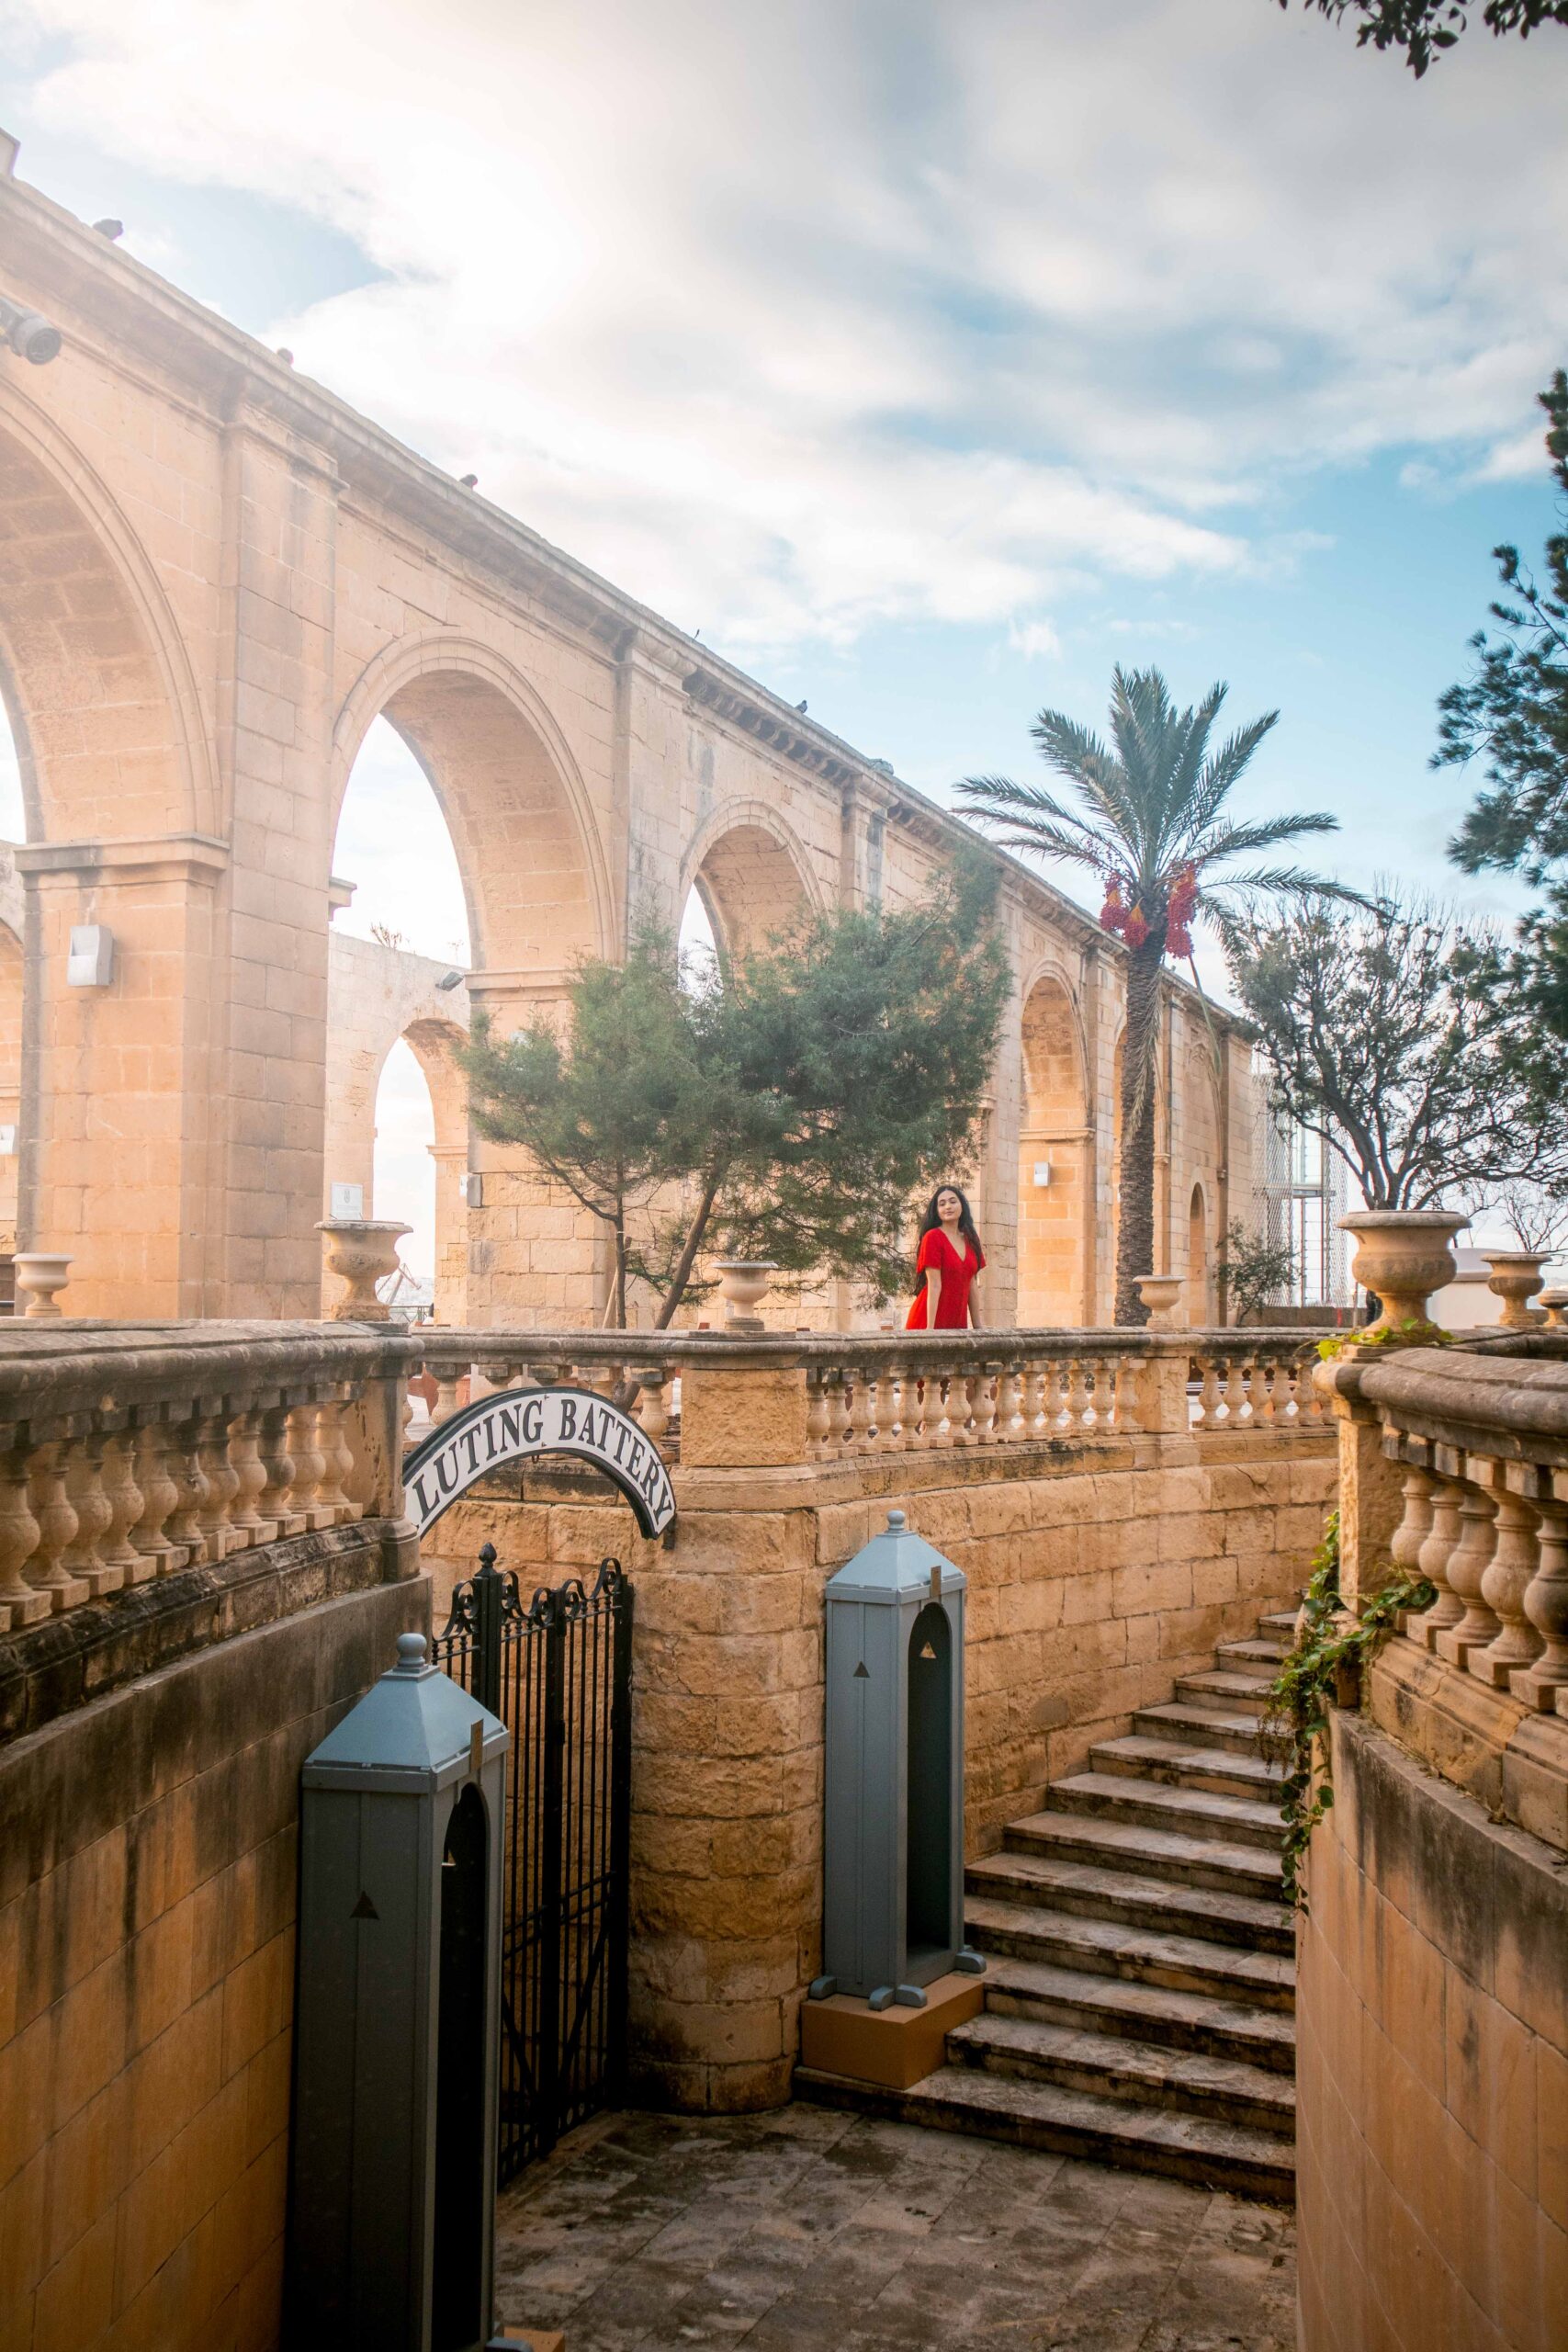 Woman wearing a red dress near the stairs of the Saluting Battery in the Upper Barrakka Gardens of Valletta, Malta